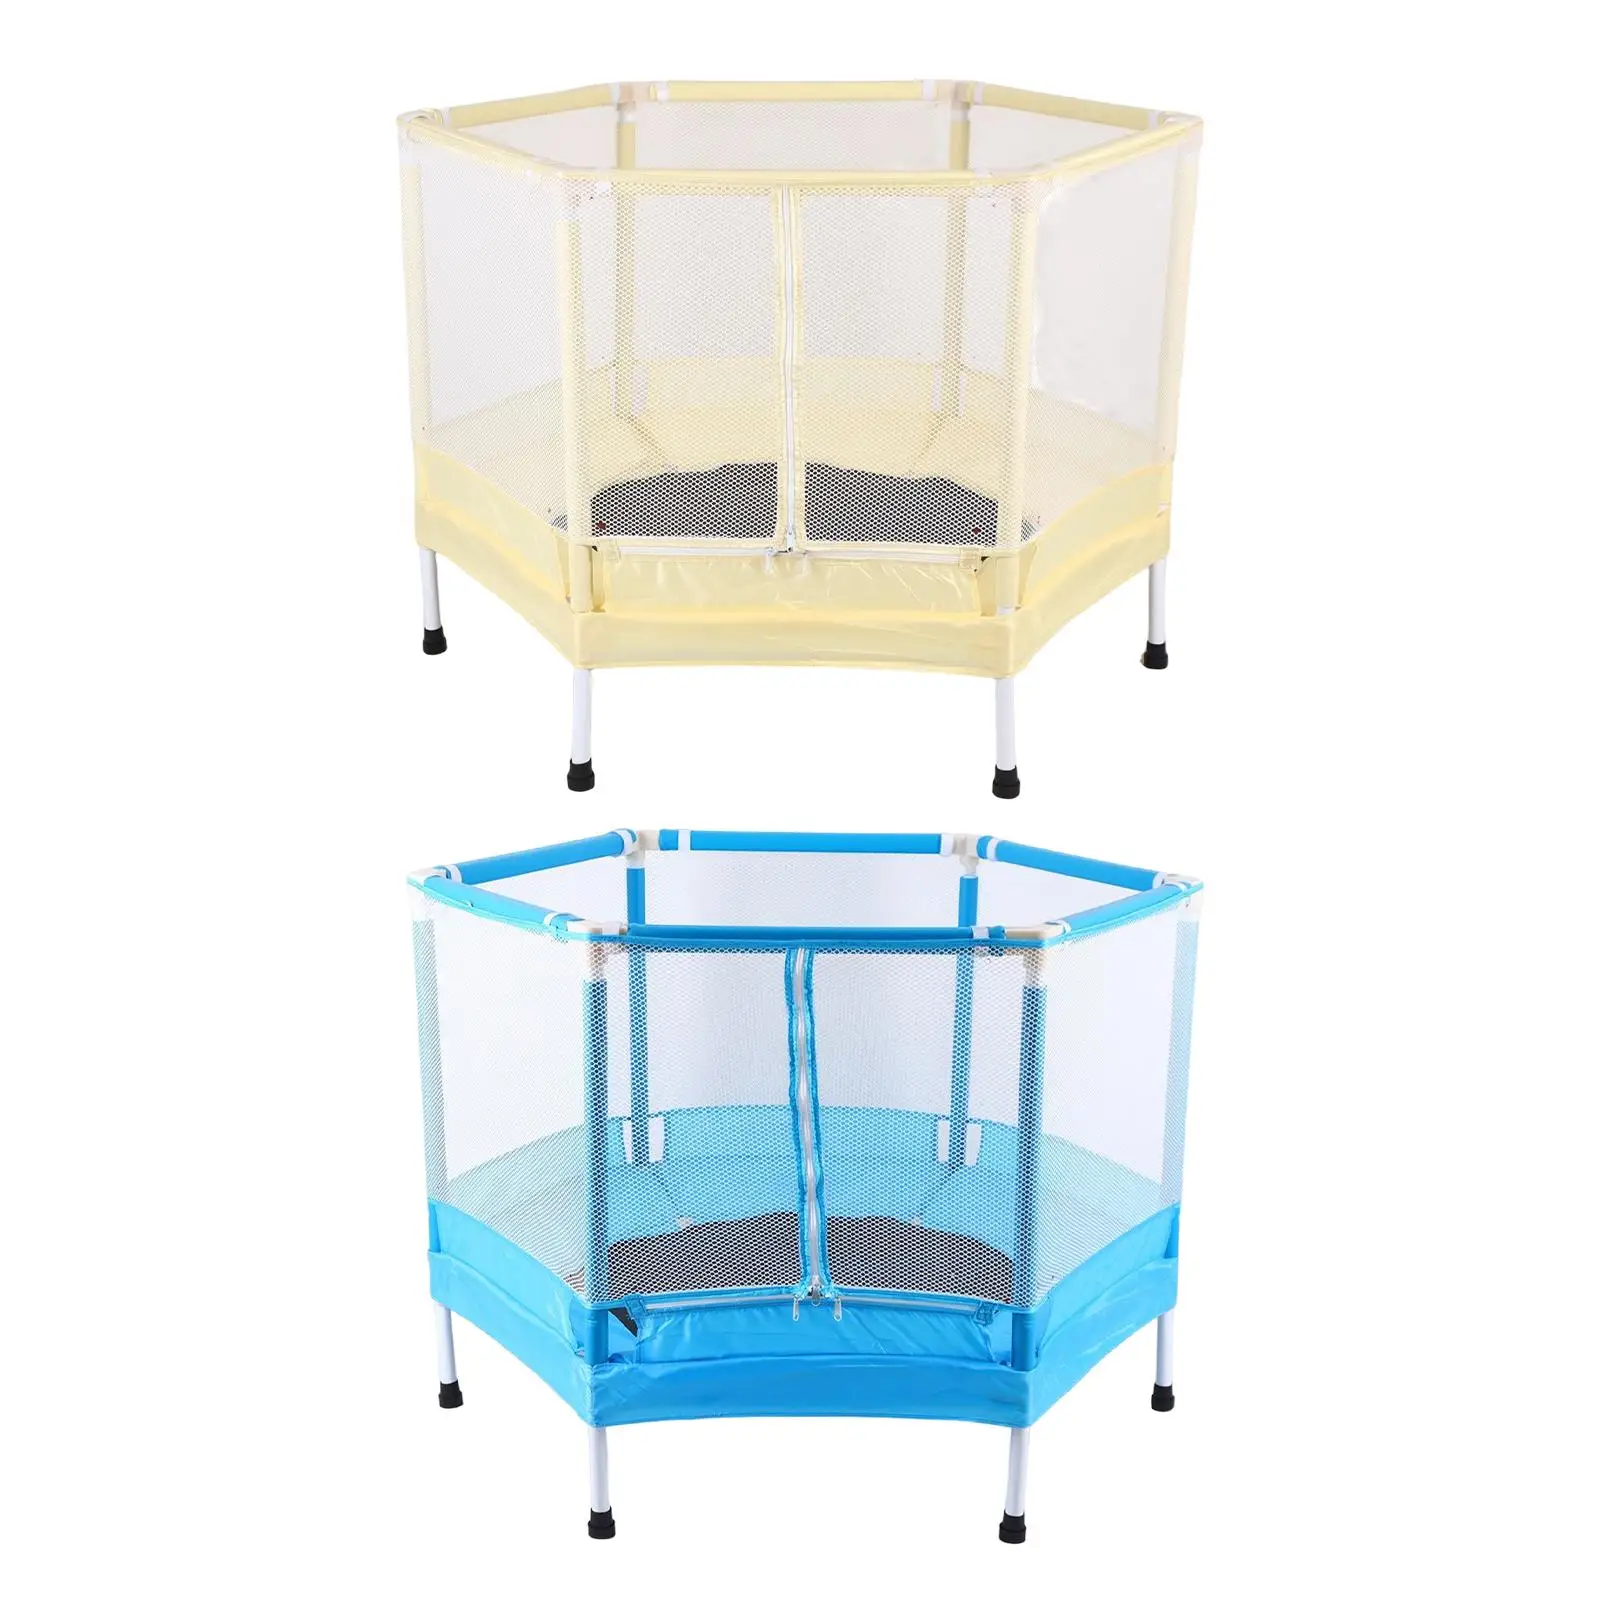 Children Jumping Trampoline with Enclosure Net , with Fence, Spring cover mat, Jumping Pad, and Necessary Installation Tools